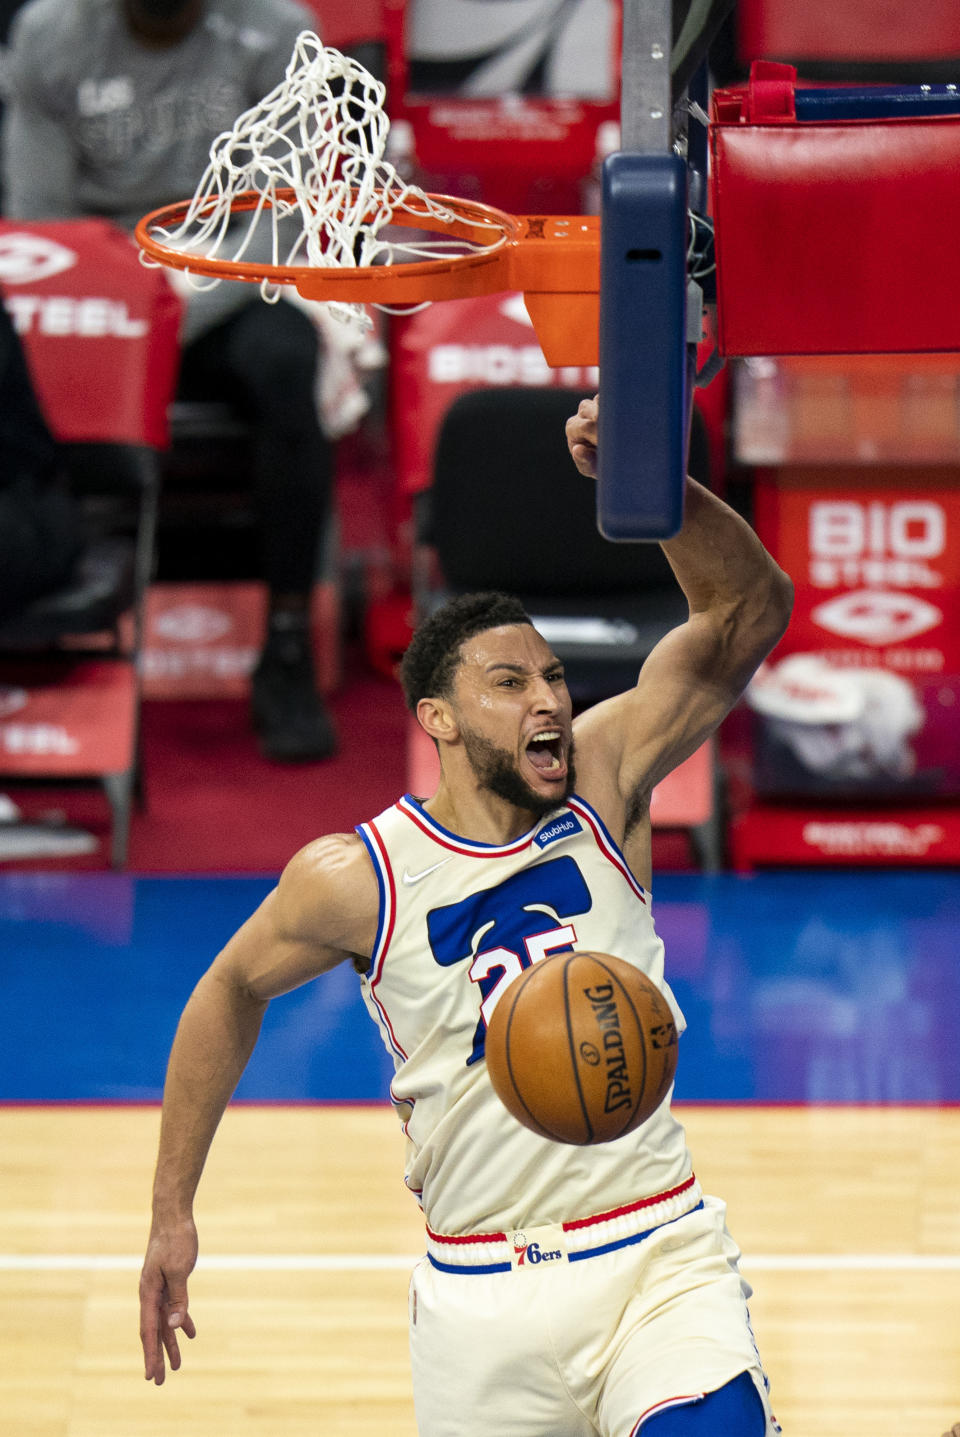 Philadelphia 76ers' Ben Simmons reacts to his dunk during the first half of an NBA basketball game against the San Antonio Spurs, Sunday, March 14, 2021, in Philadelphia. (AP Photo/Chris Szagola)